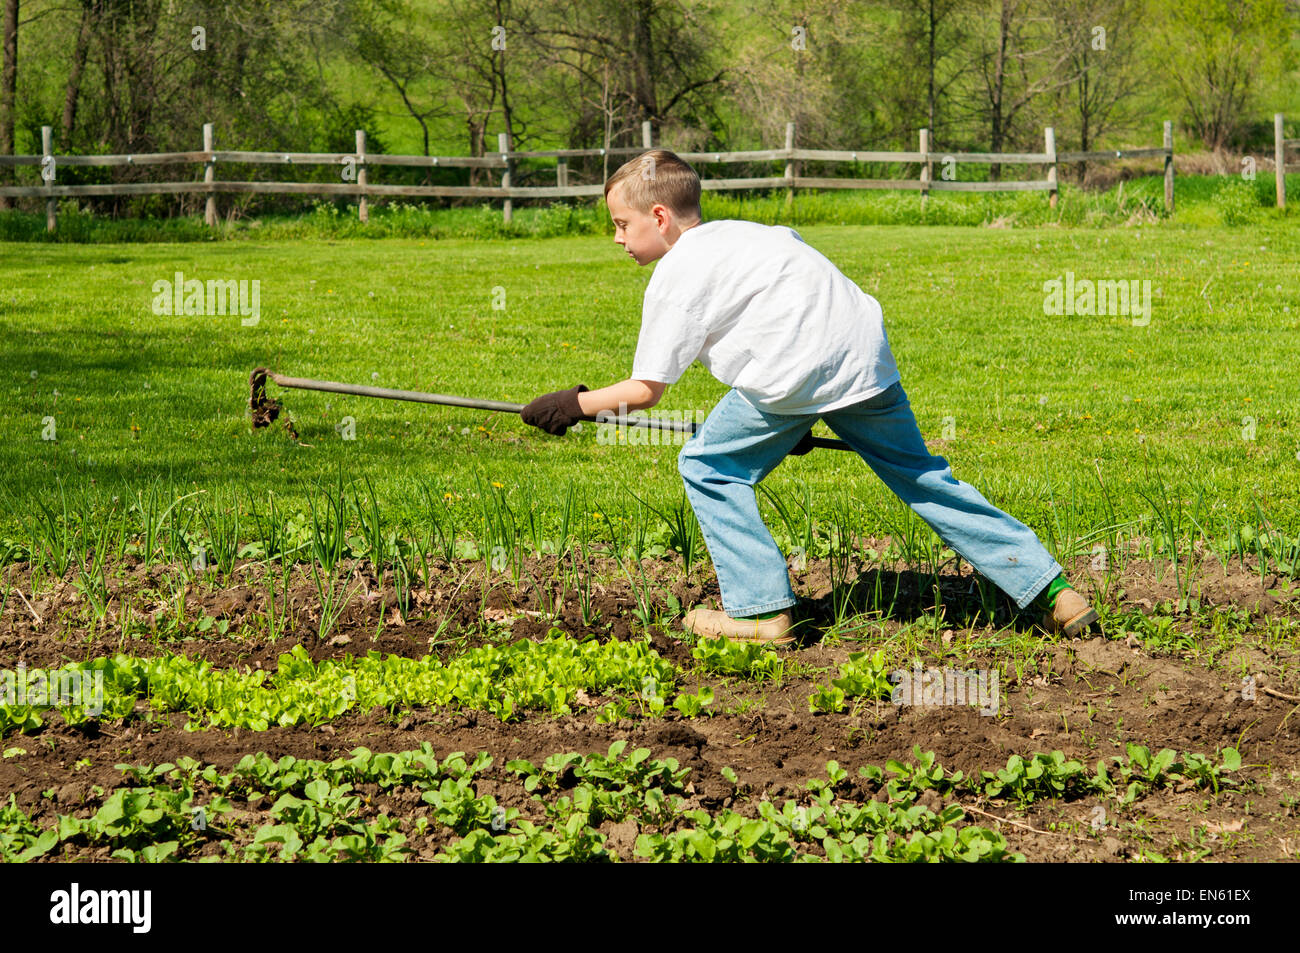 Boy using hoe to weed vegetables in garden Stock Photo